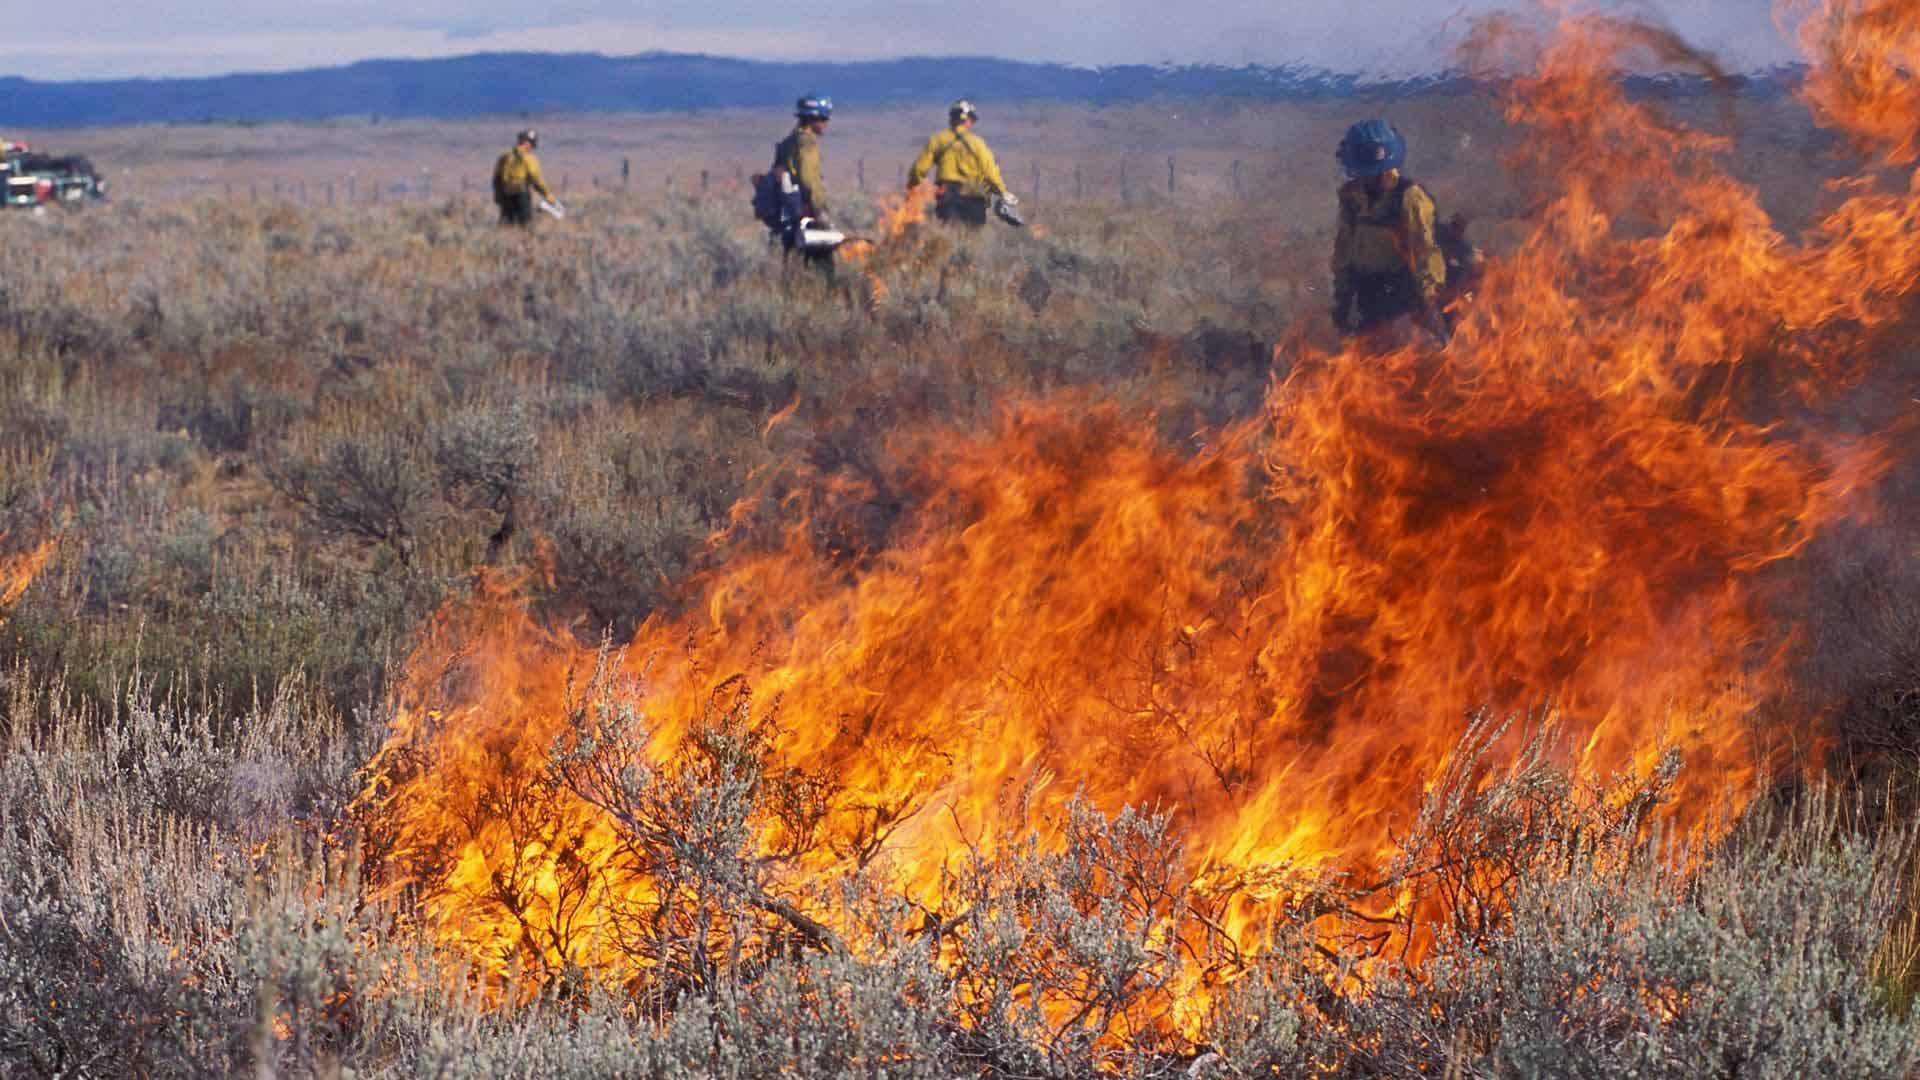 Firefighters working amongst brush during a controlled burn with large flames in the foreground